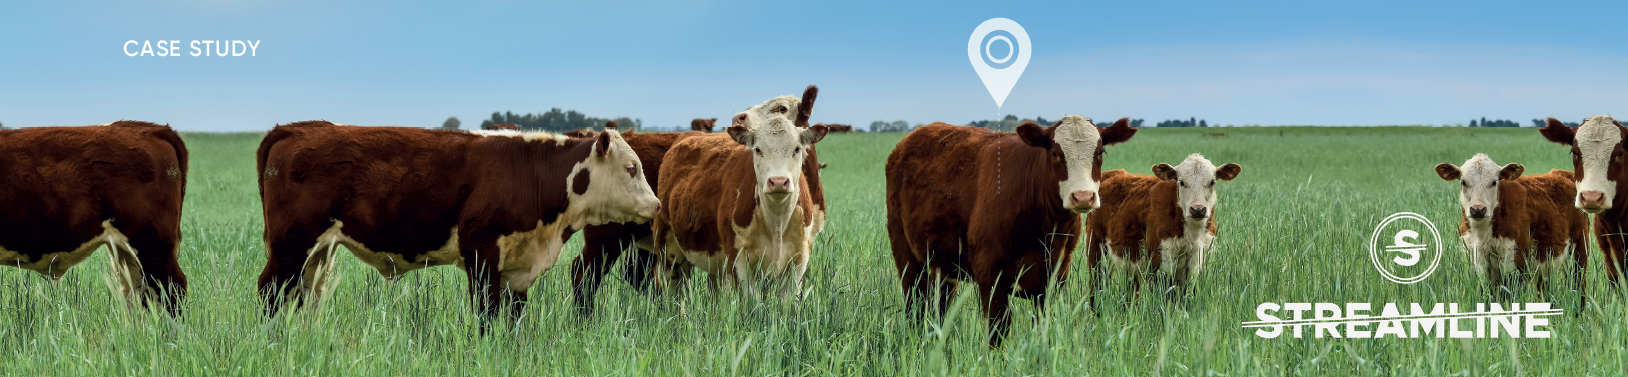 Streamline uses satellite and nb-iot connectivity from floLIVE and commscloud to boost livestock traceability